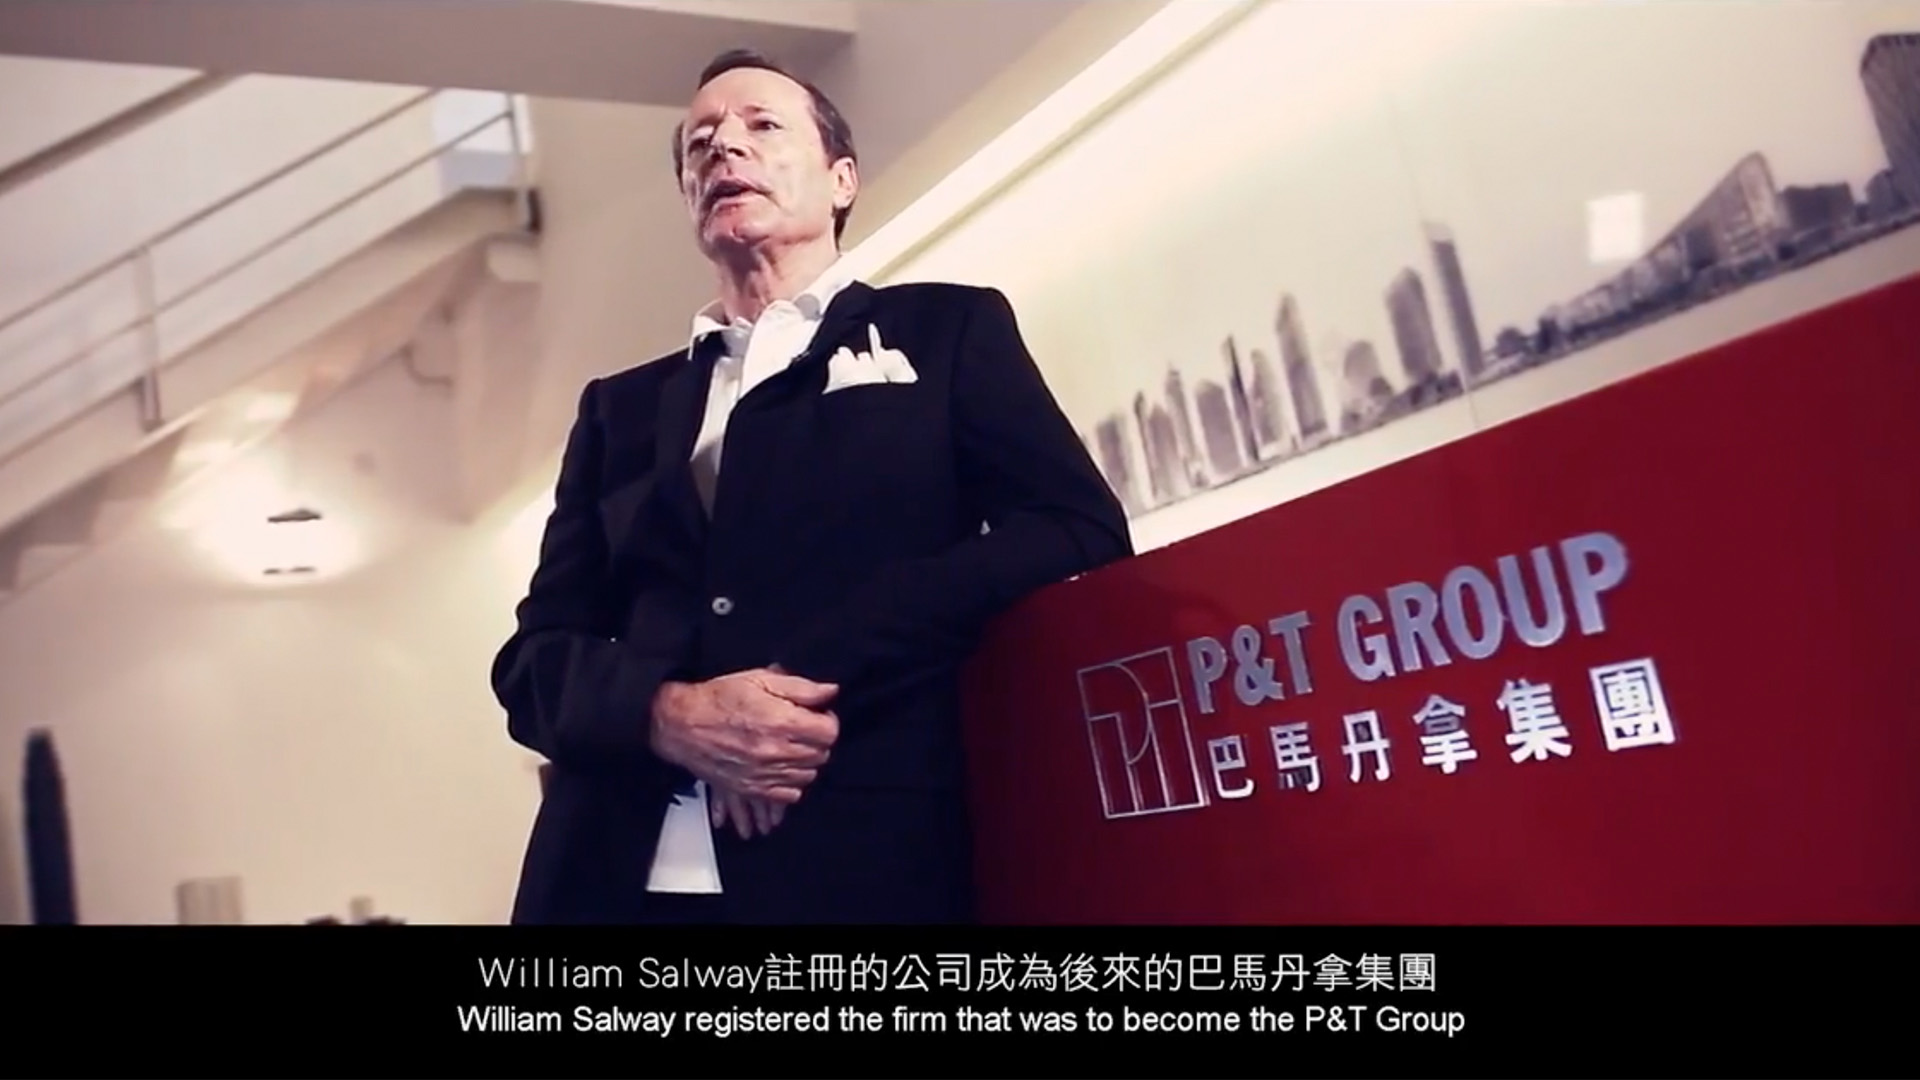 The production of the corporate video for P&T by D2 Studio Marketing Agency and Branding Agency Hong Kong and Guangzhou China who provide production of corporate videos 1